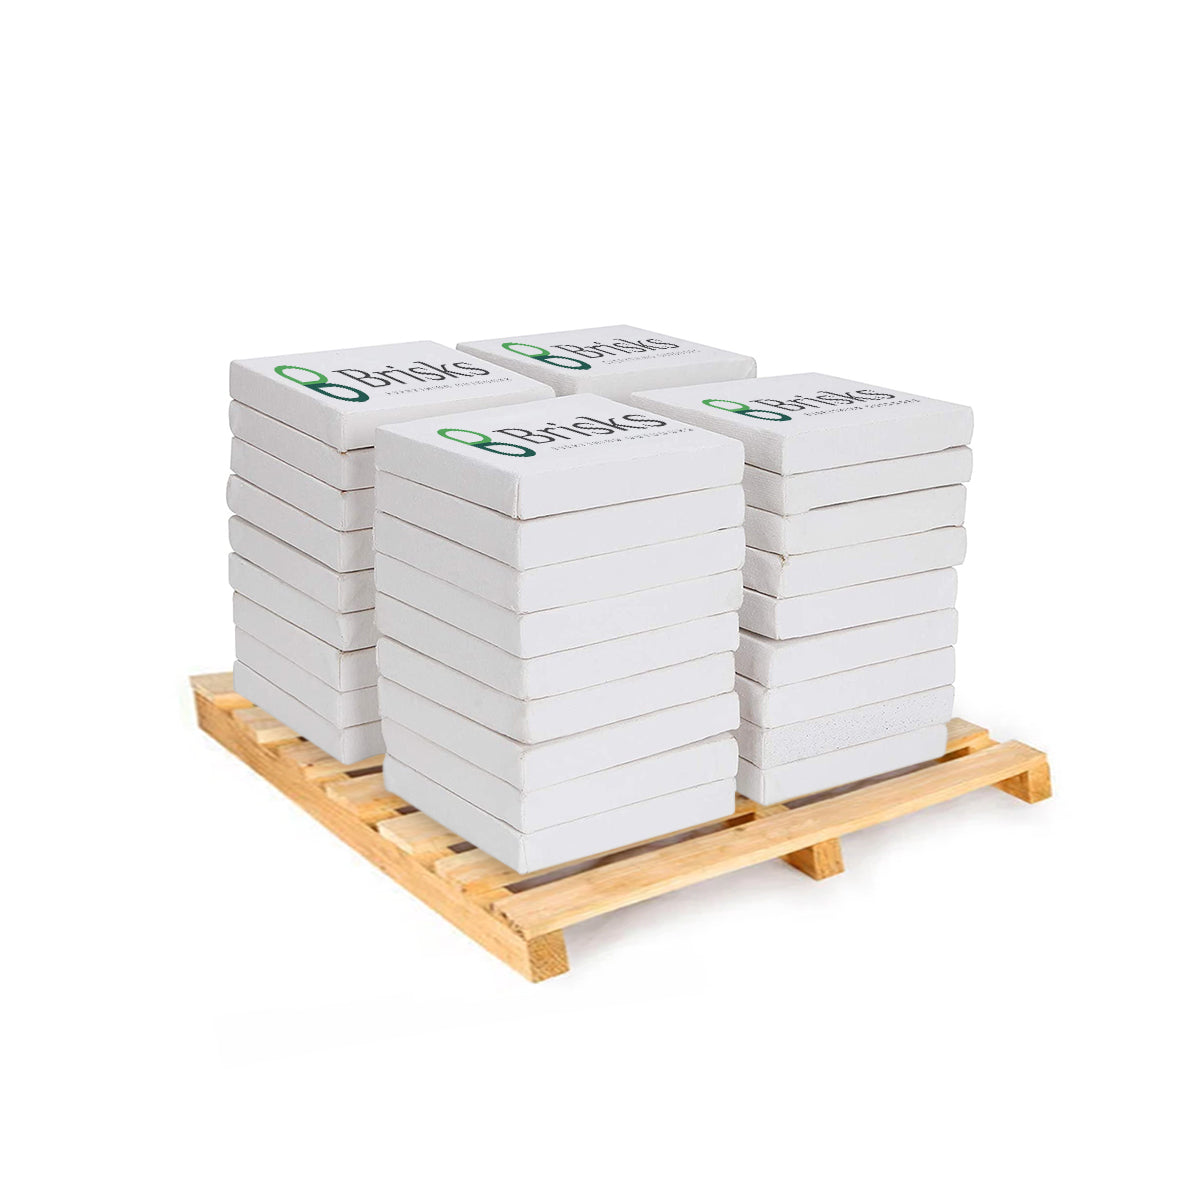 A wooden pallet stacked with multiple piles of white eco-friendly Fence Post Concrete Mix, each labeled with "Brisks" and a green infinity symbol, featuring ready-to-use showerproof packaging. The bricks are neatly arranged in several vertical stacks.